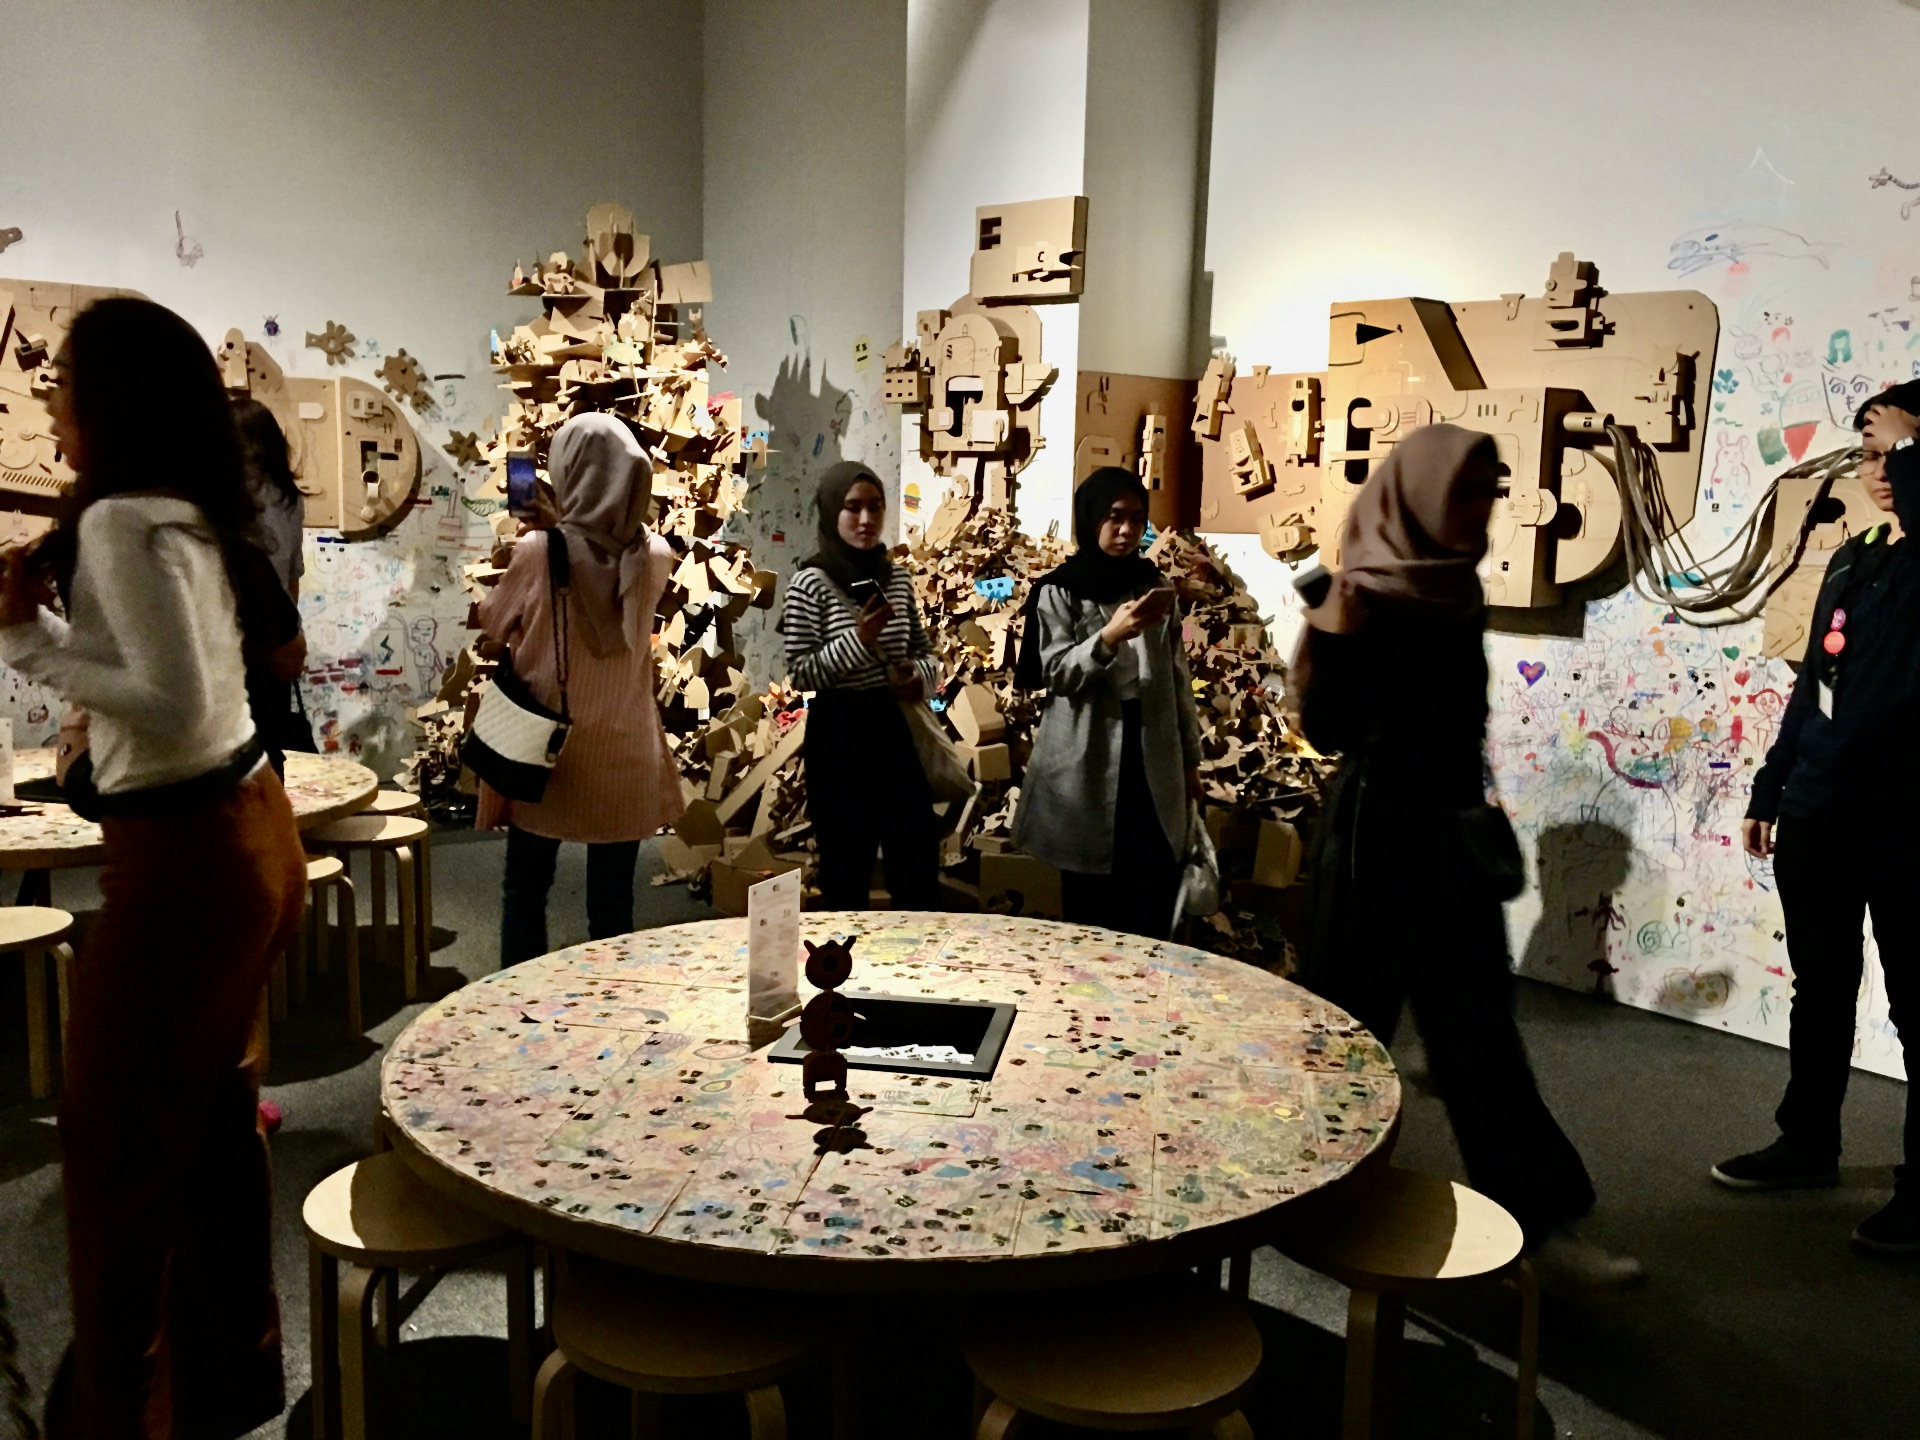 【Museums Link Asia-Pacific】Born for Art Education and Cultural Heritage: The Museum of Modern and Contemporary Art in Nusantara